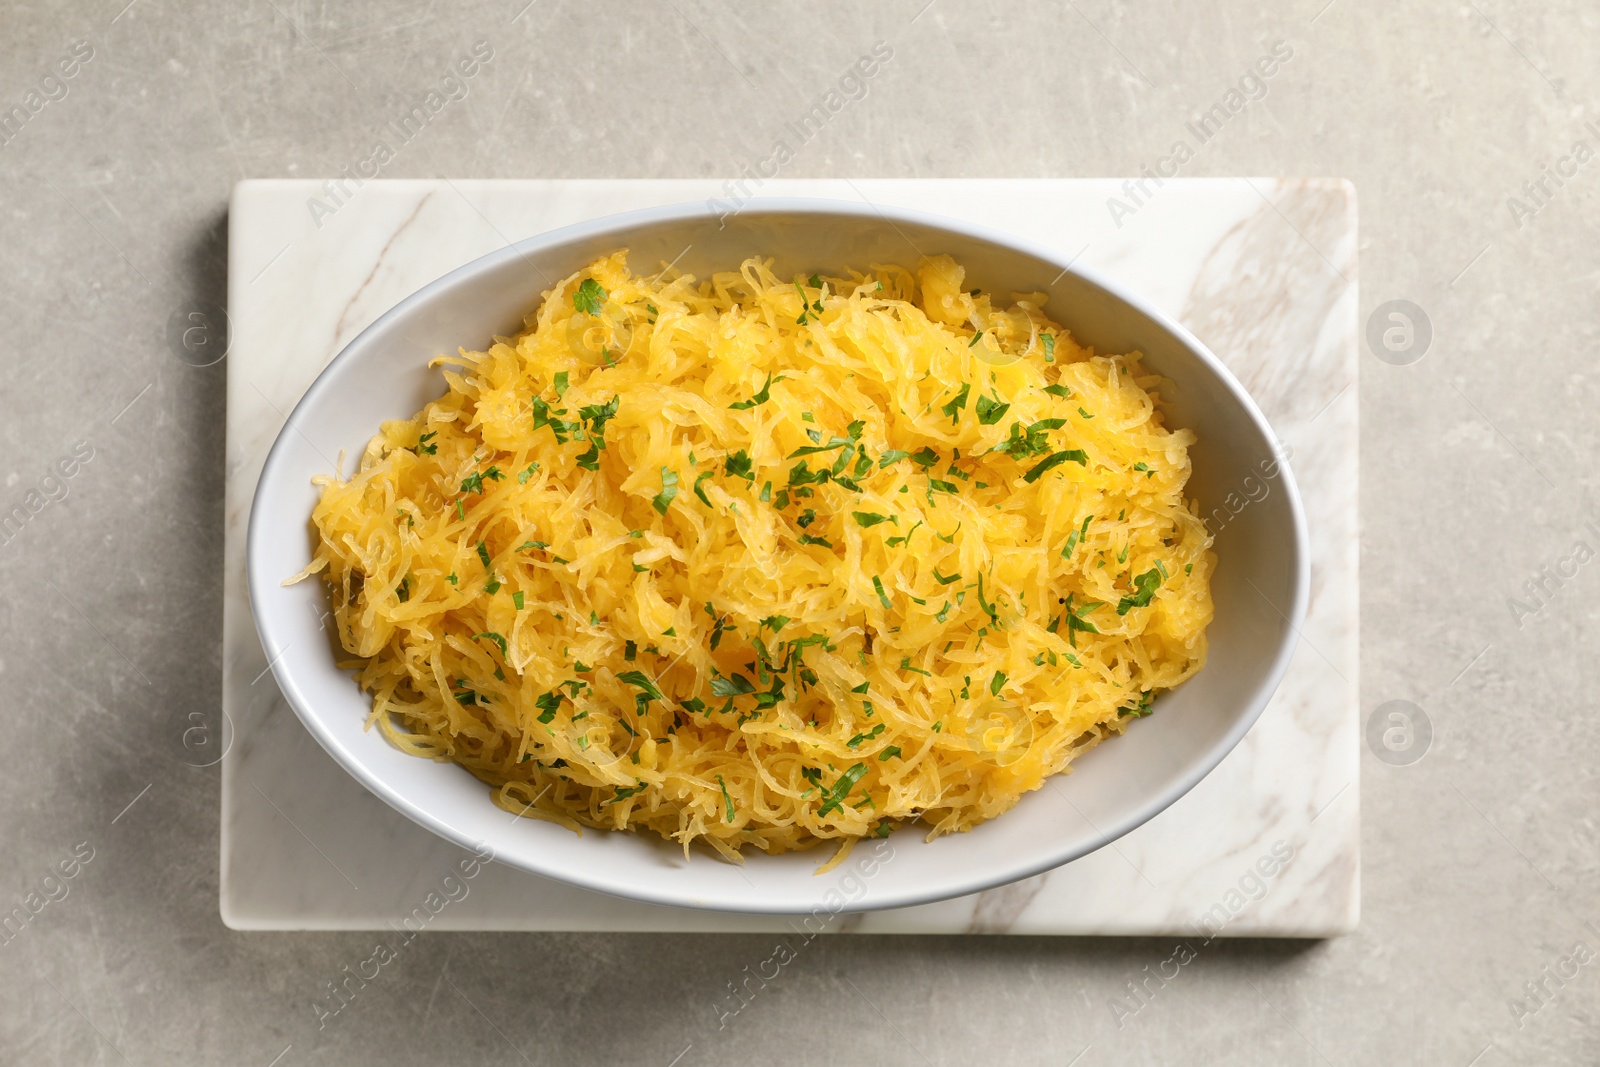 Photo of Bowl with cooked spaghetti squash on light background, top view